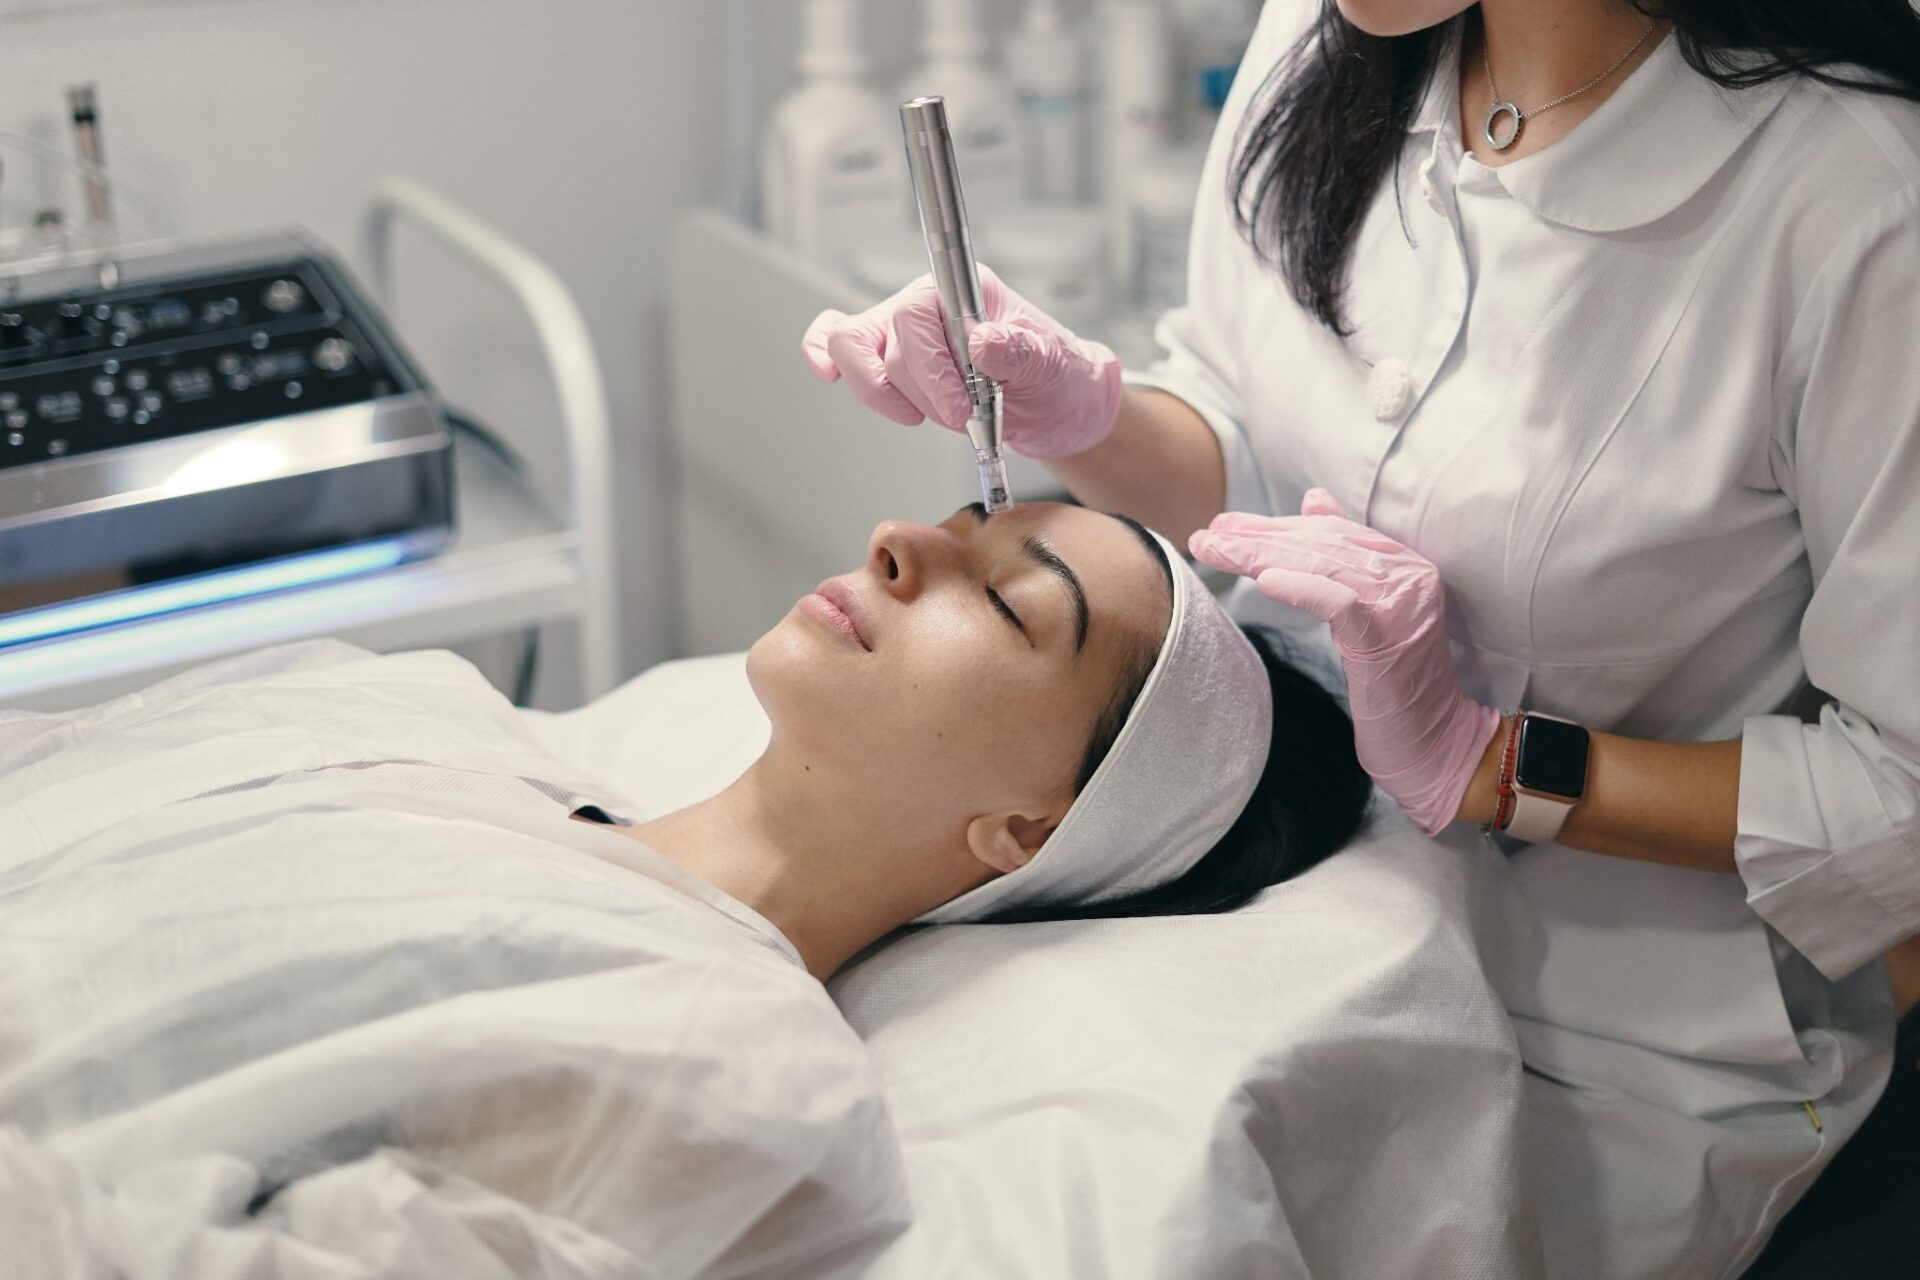 Removing permanent makeup is a lengthy and very painful process